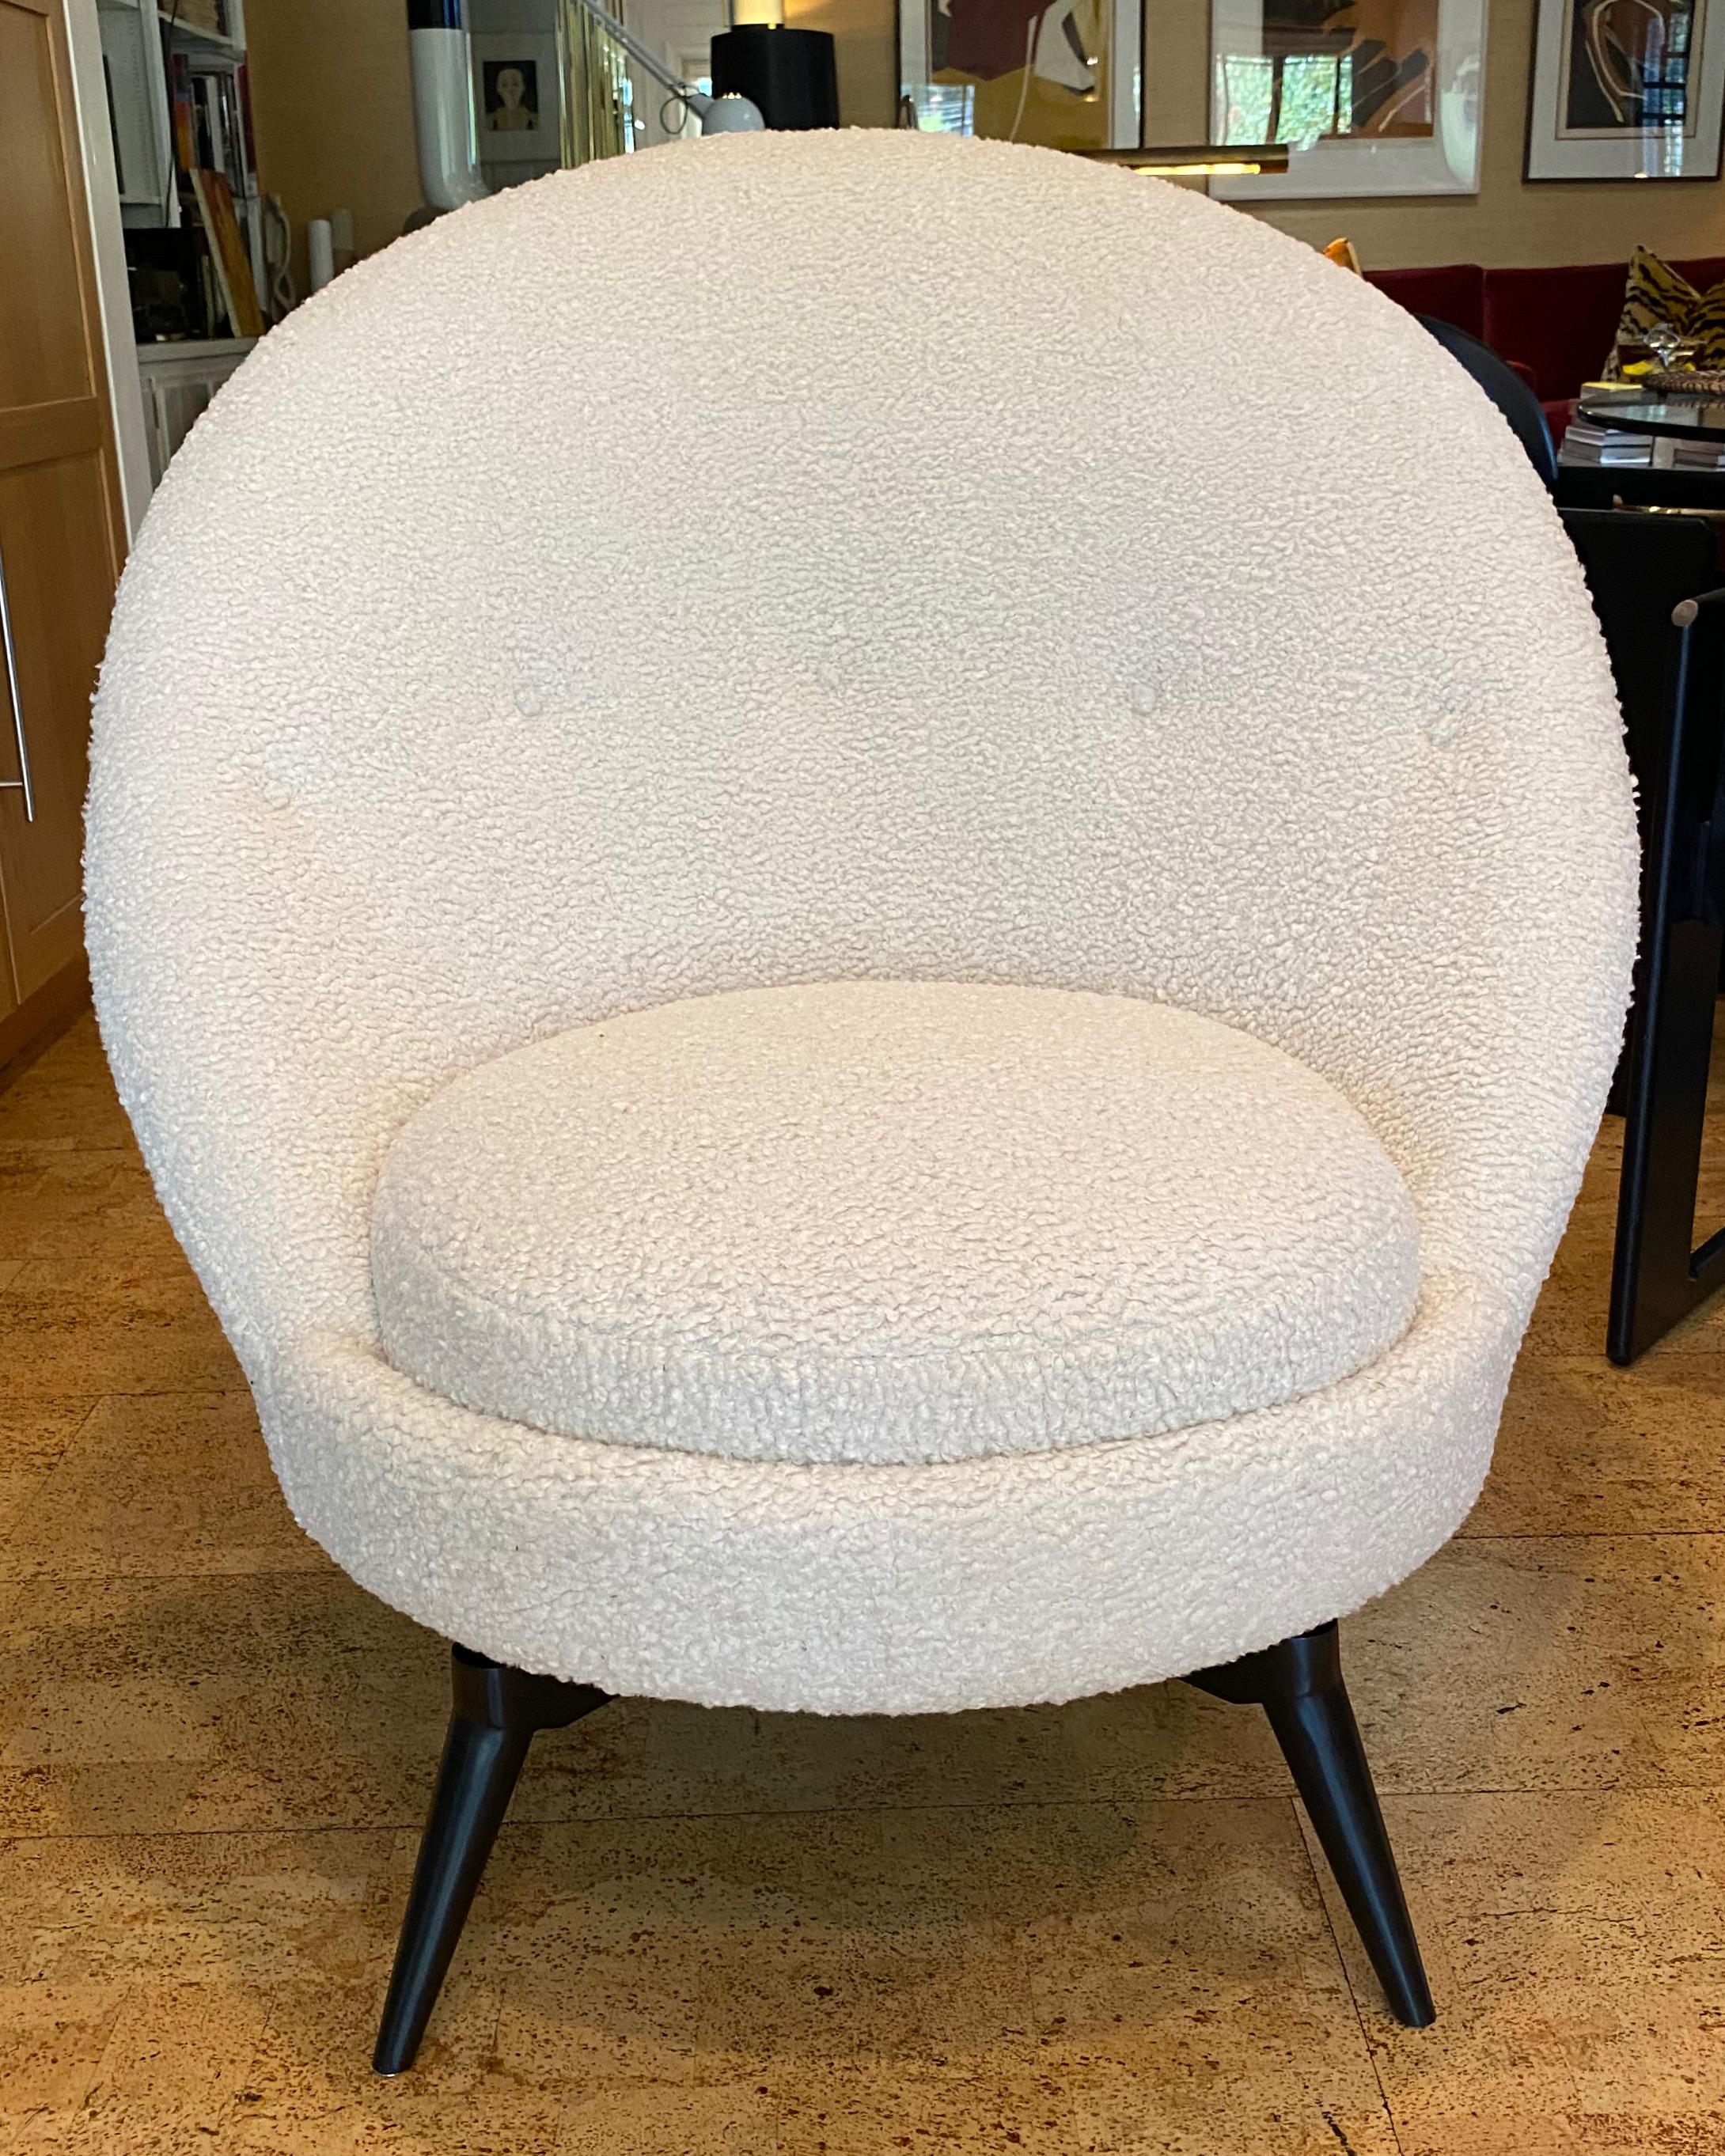 Swivel egg chair in the French midcentury style. This sophisticated chair is upholstered in a luxurious heavy-weight Bouclé. This super stylish and versatile example is as comfortable as it looks and is painstakingly patterned with a hardwood frame,